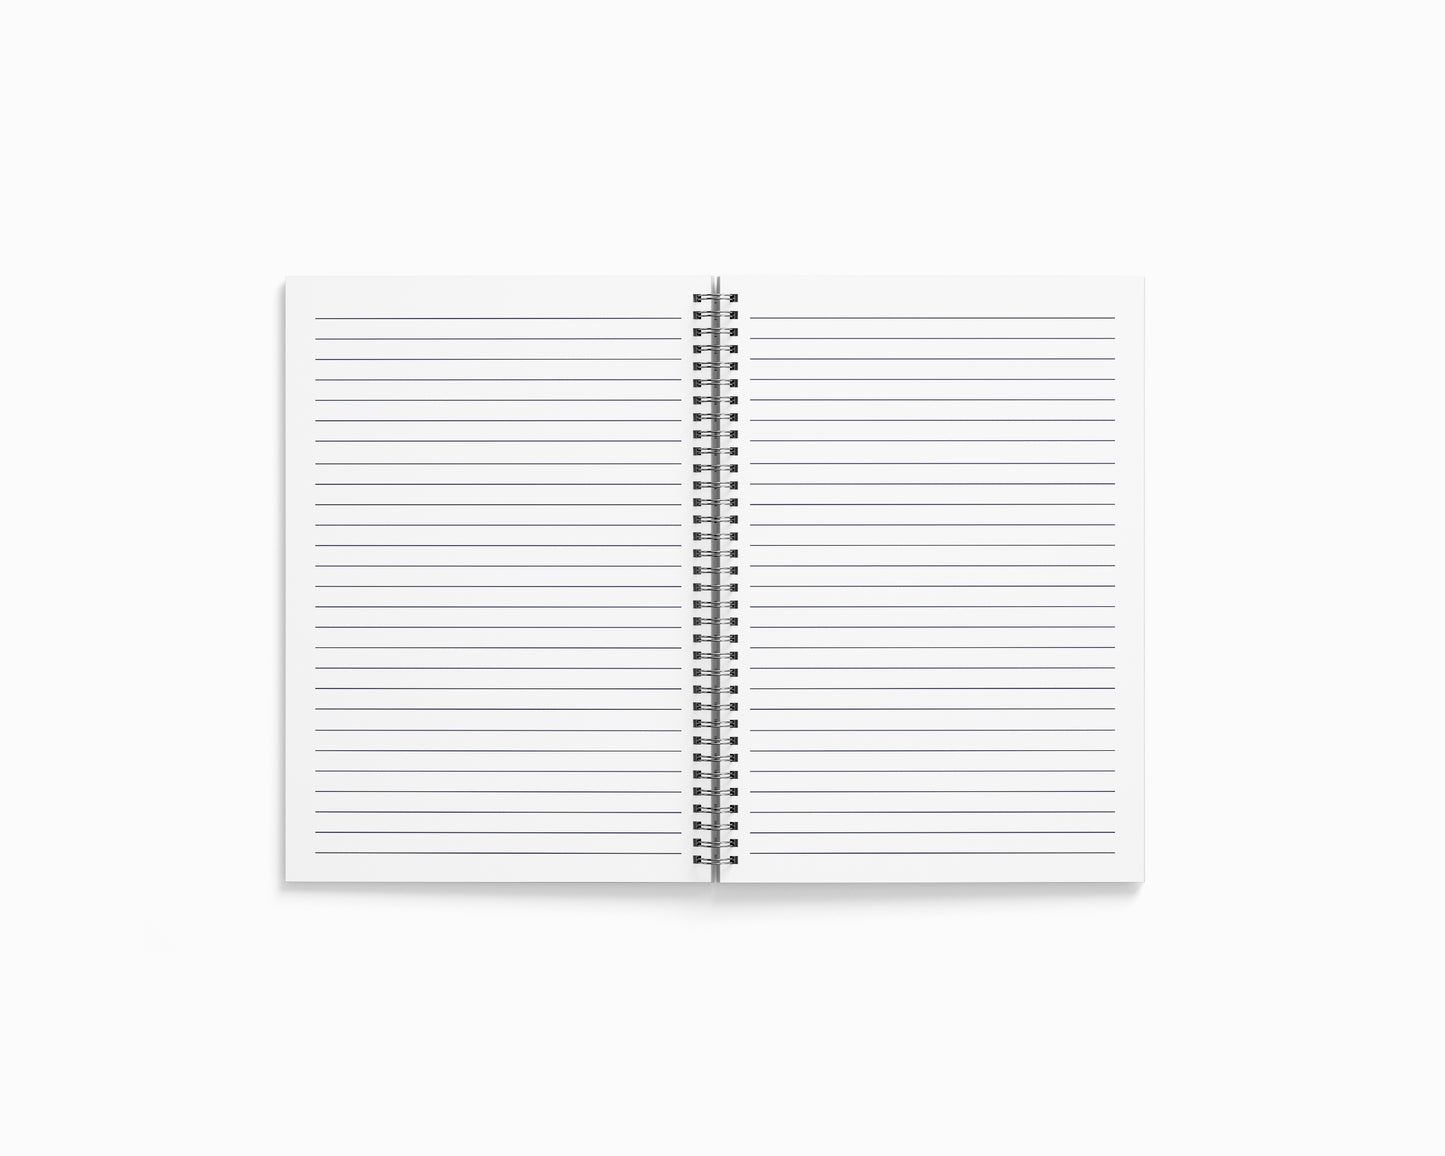 Aadityana Notebook (A5 Size, 100 Pages, Ruled)